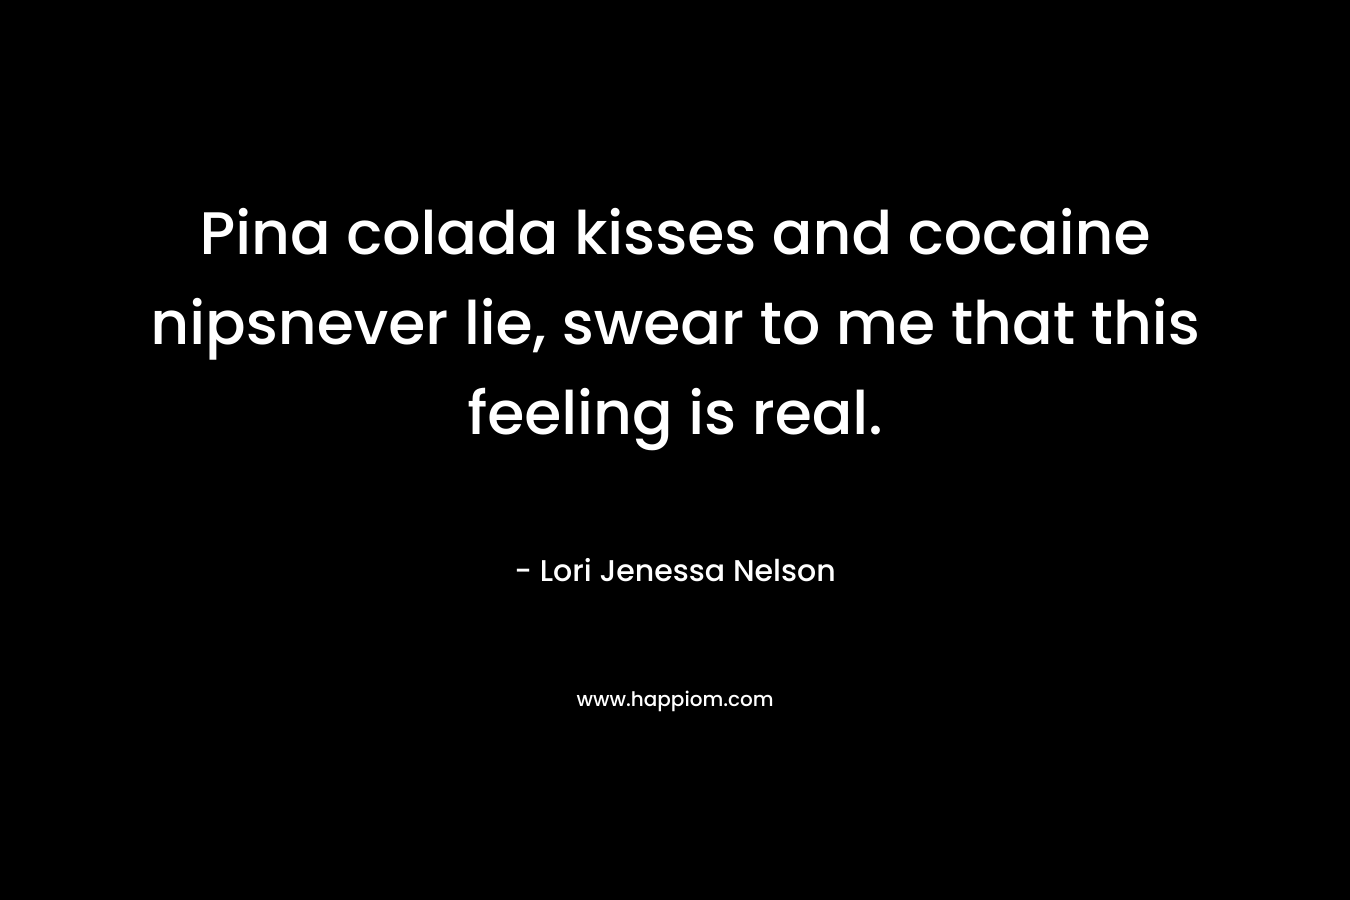 Pina colada kisses and cocaine nipsnever lie, swear to me that this feeling is real. – Lori Jenessa Nelson